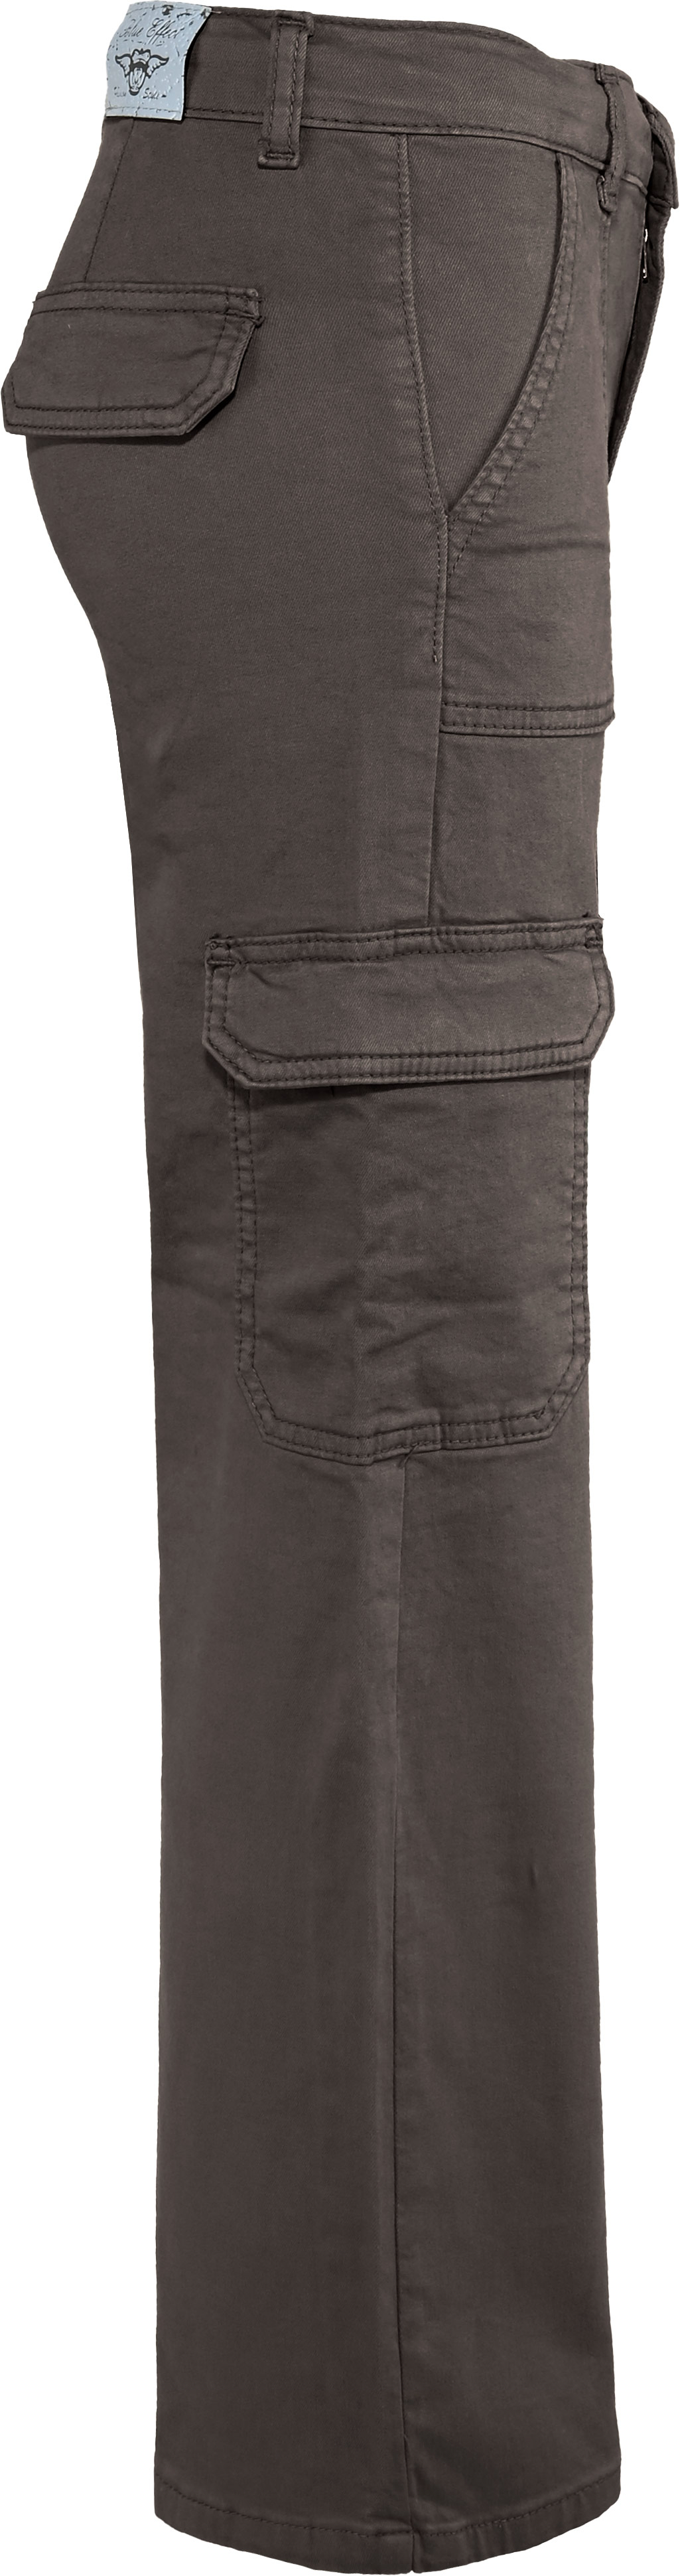 1364-Girls Super Wide Leg Pant Straight, Cargo, available in Normal